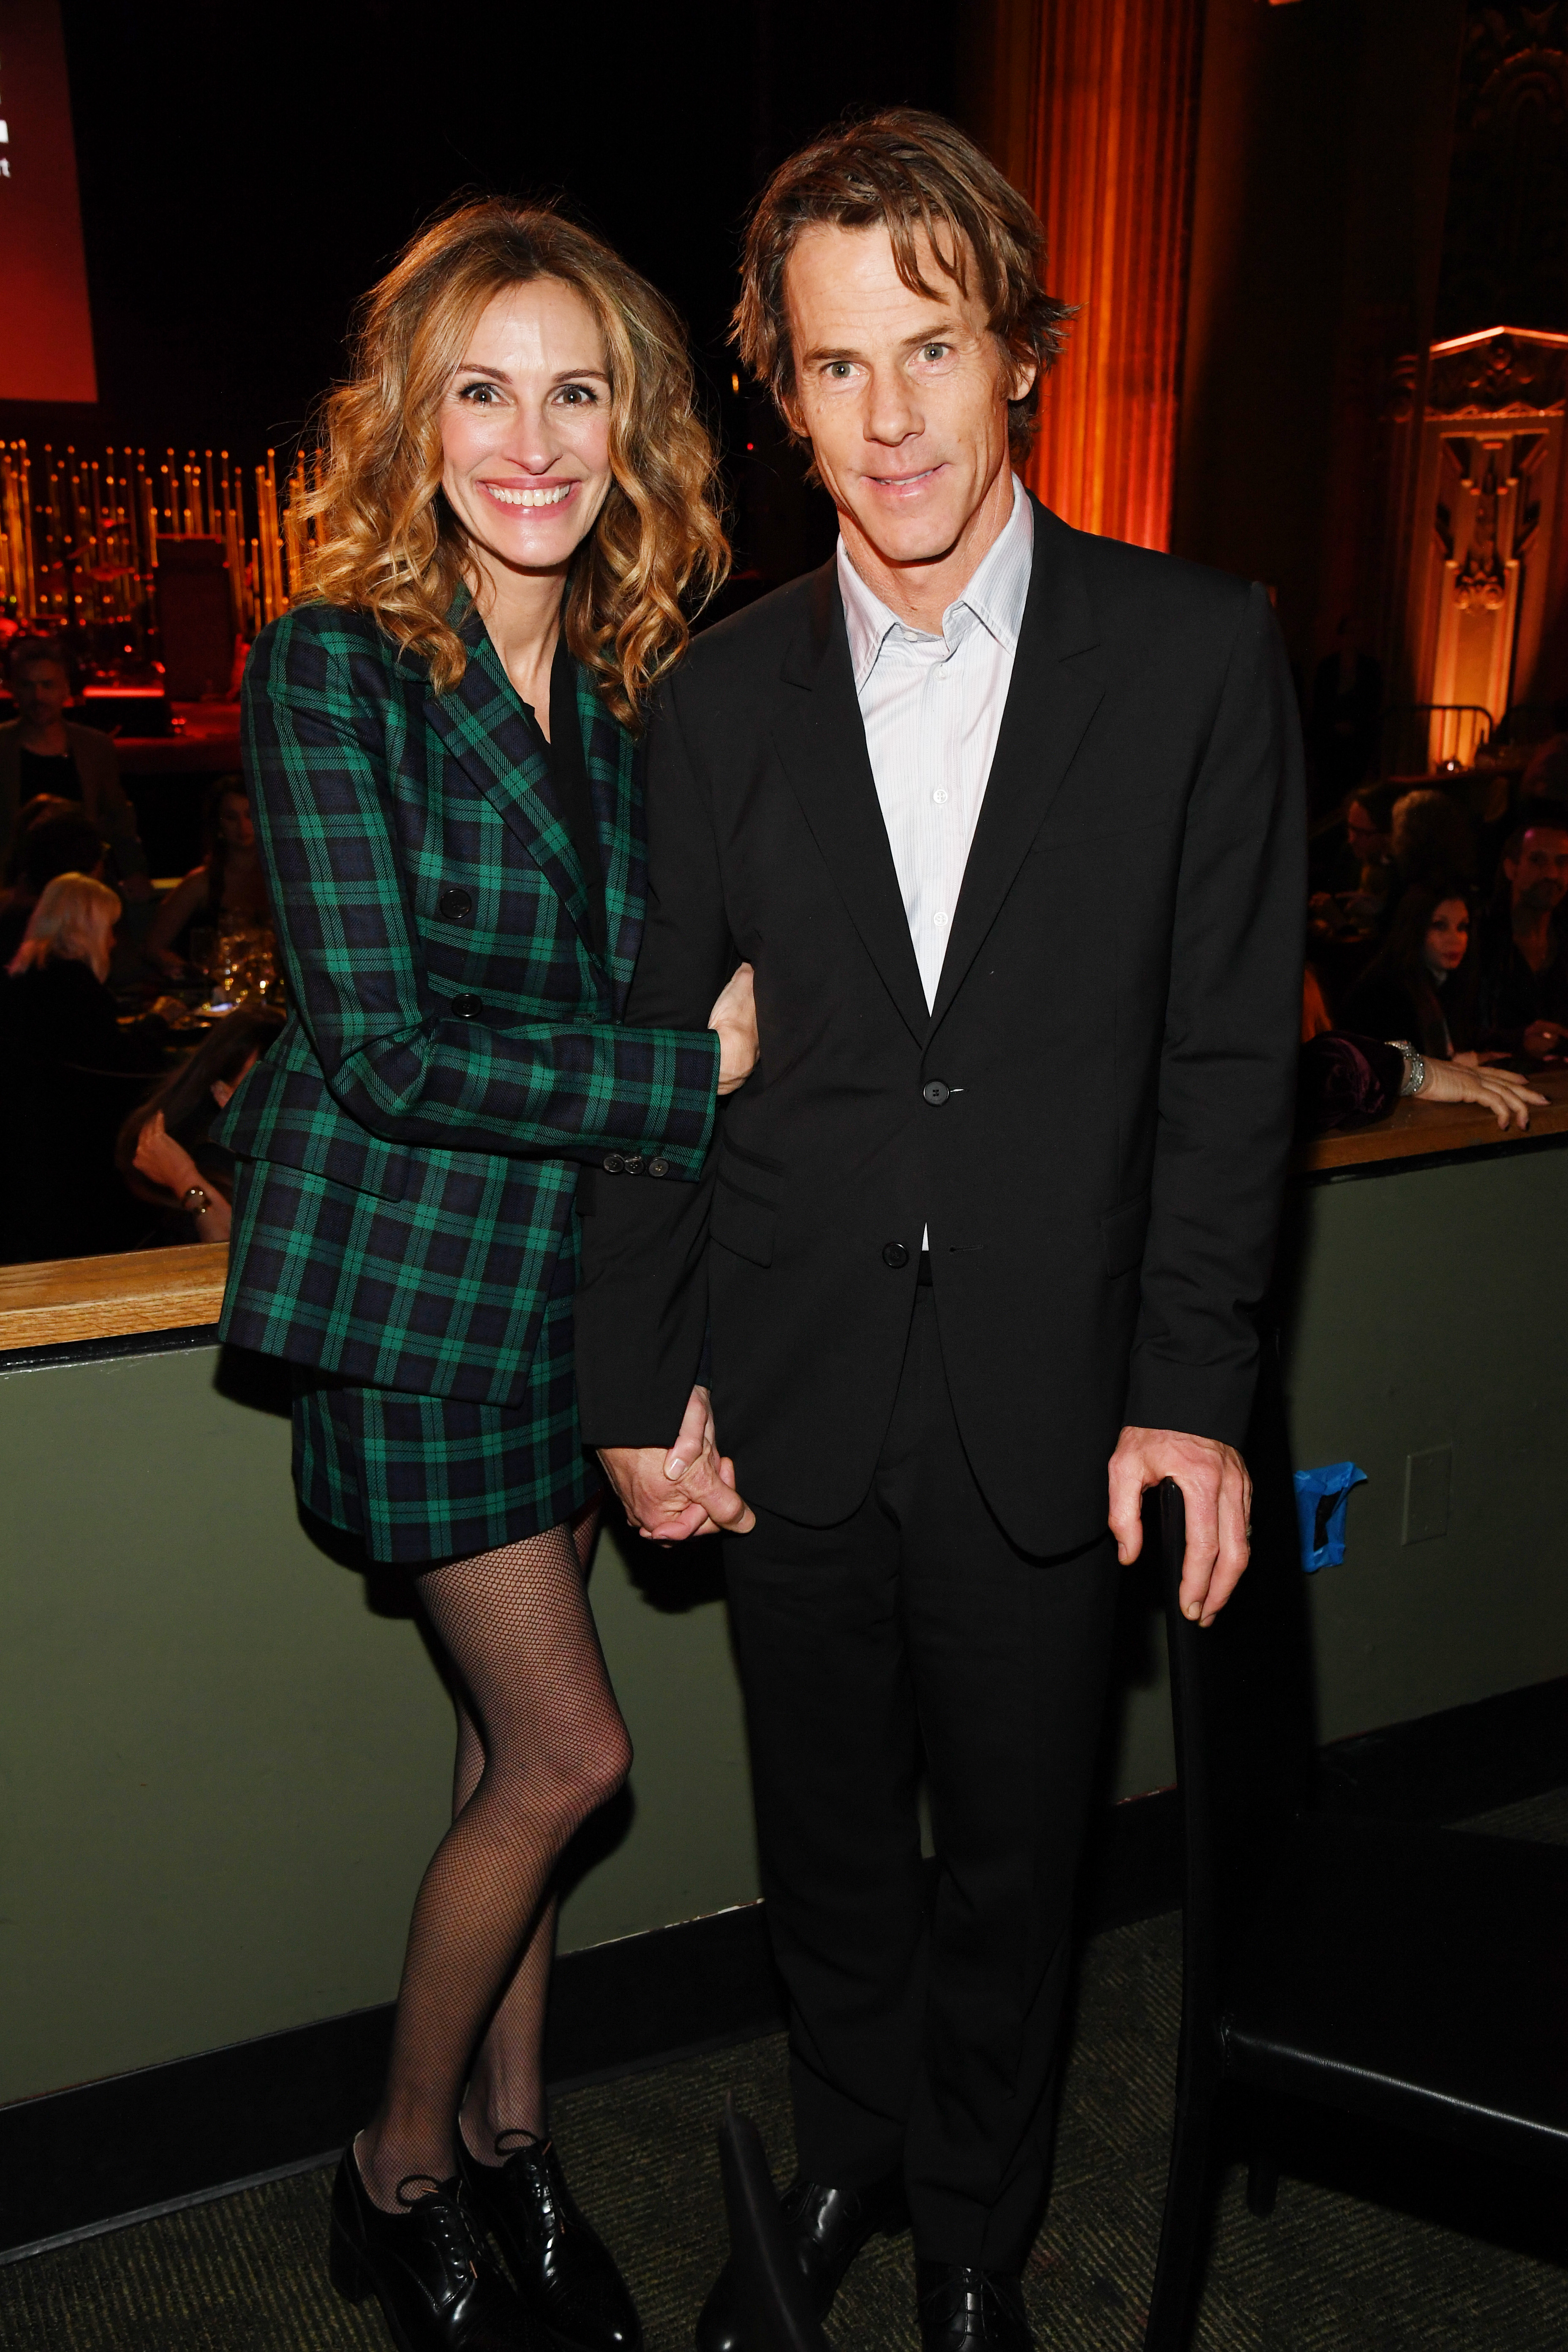 Julia Roberts and Danny Moder at the CORE Gala in Los Angeles, 2020 | Source: Getty Images